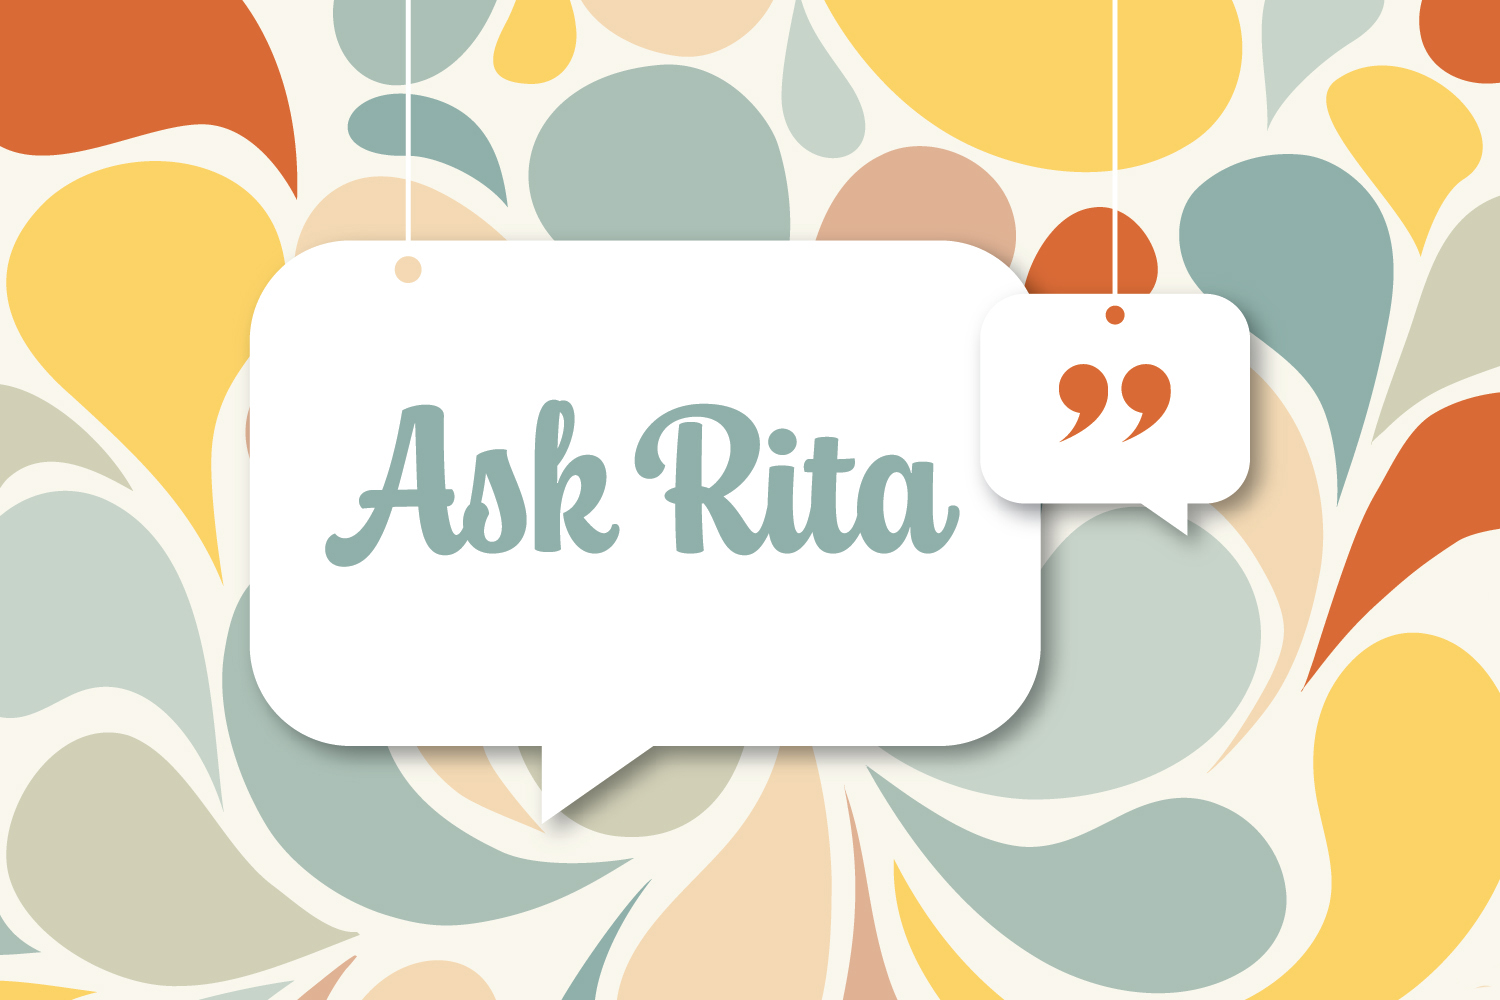 Ask Rita: Criminal Records Checks for Prospective Staff and Volunteers